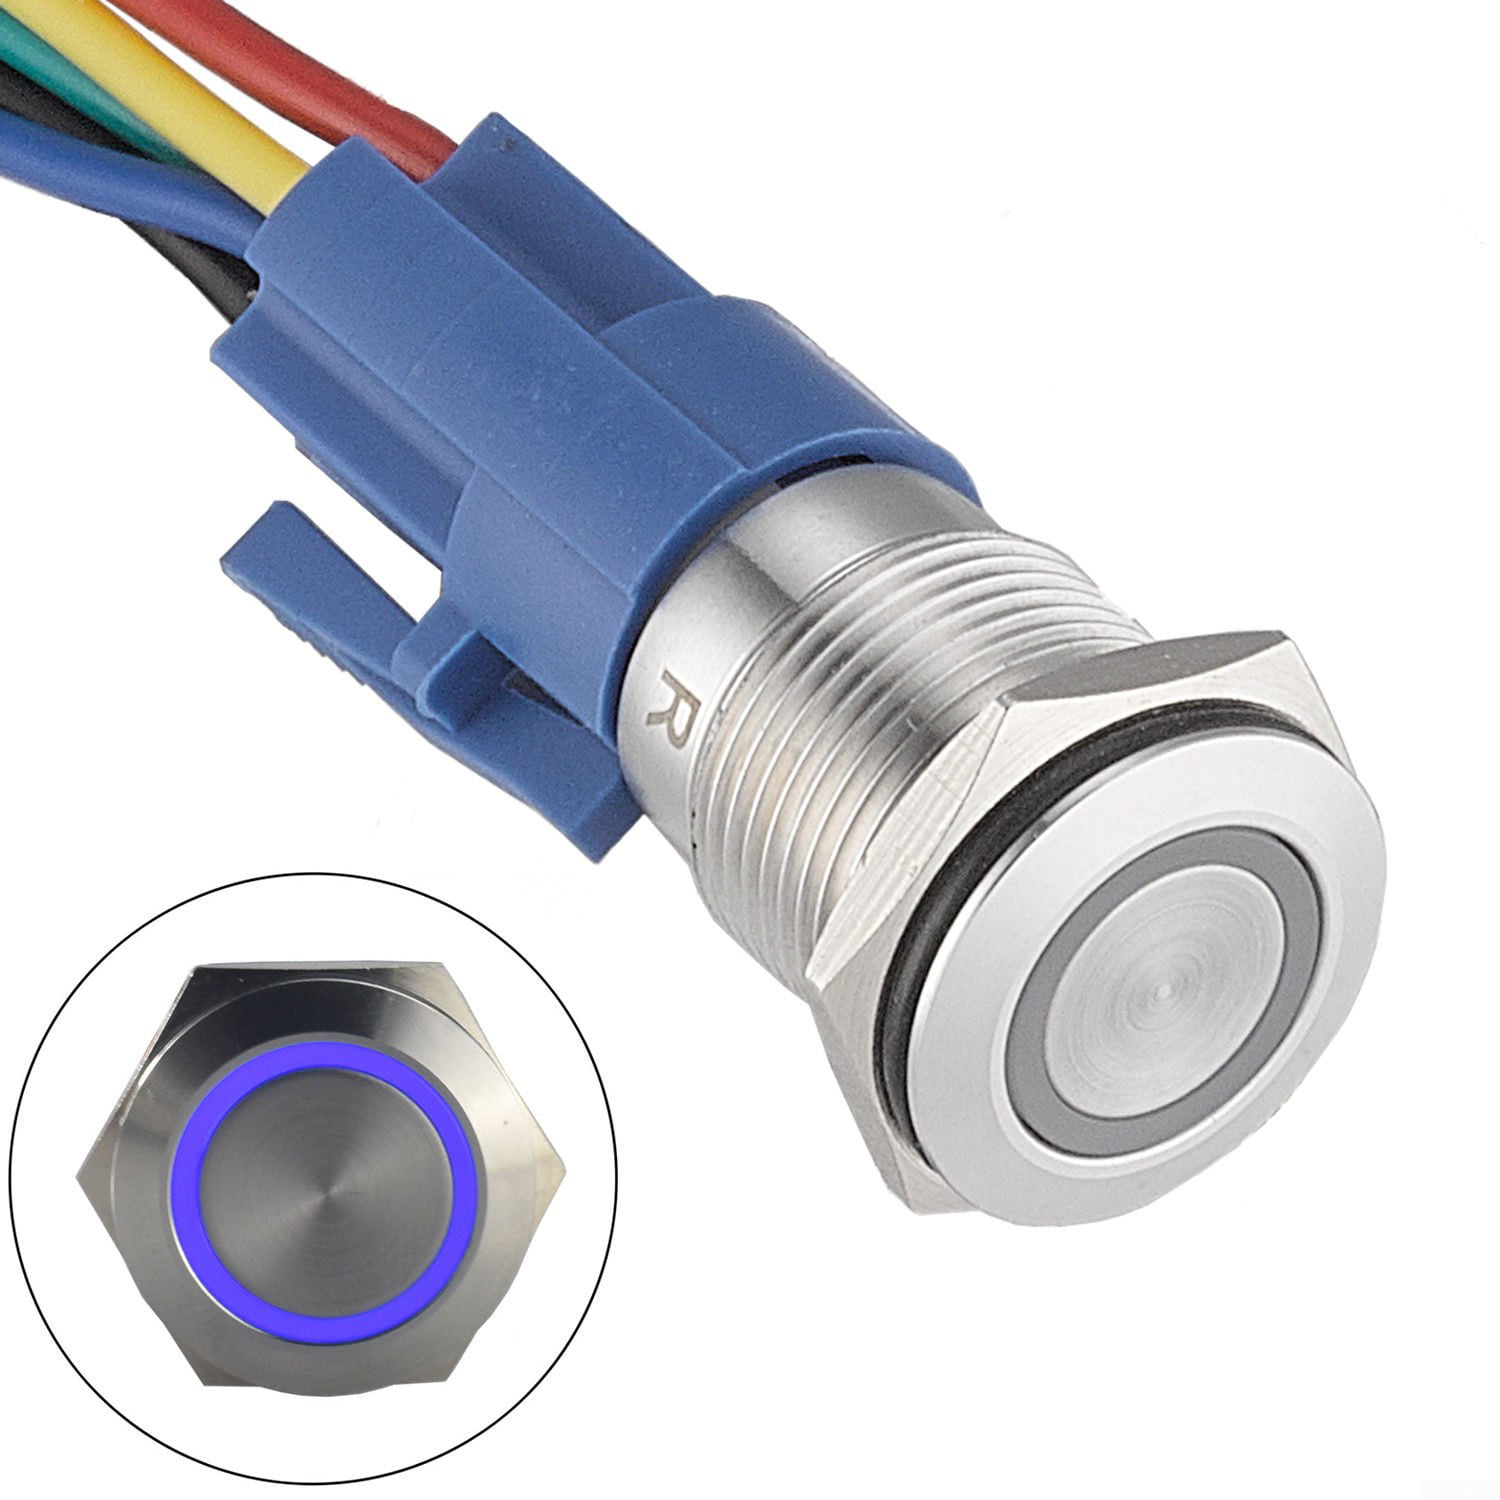 2 of MARINE SS304 BLUE LED 12V FLUSH LIGHT AUTO ON-OFF PUSH SWITCH RING BUTTON 